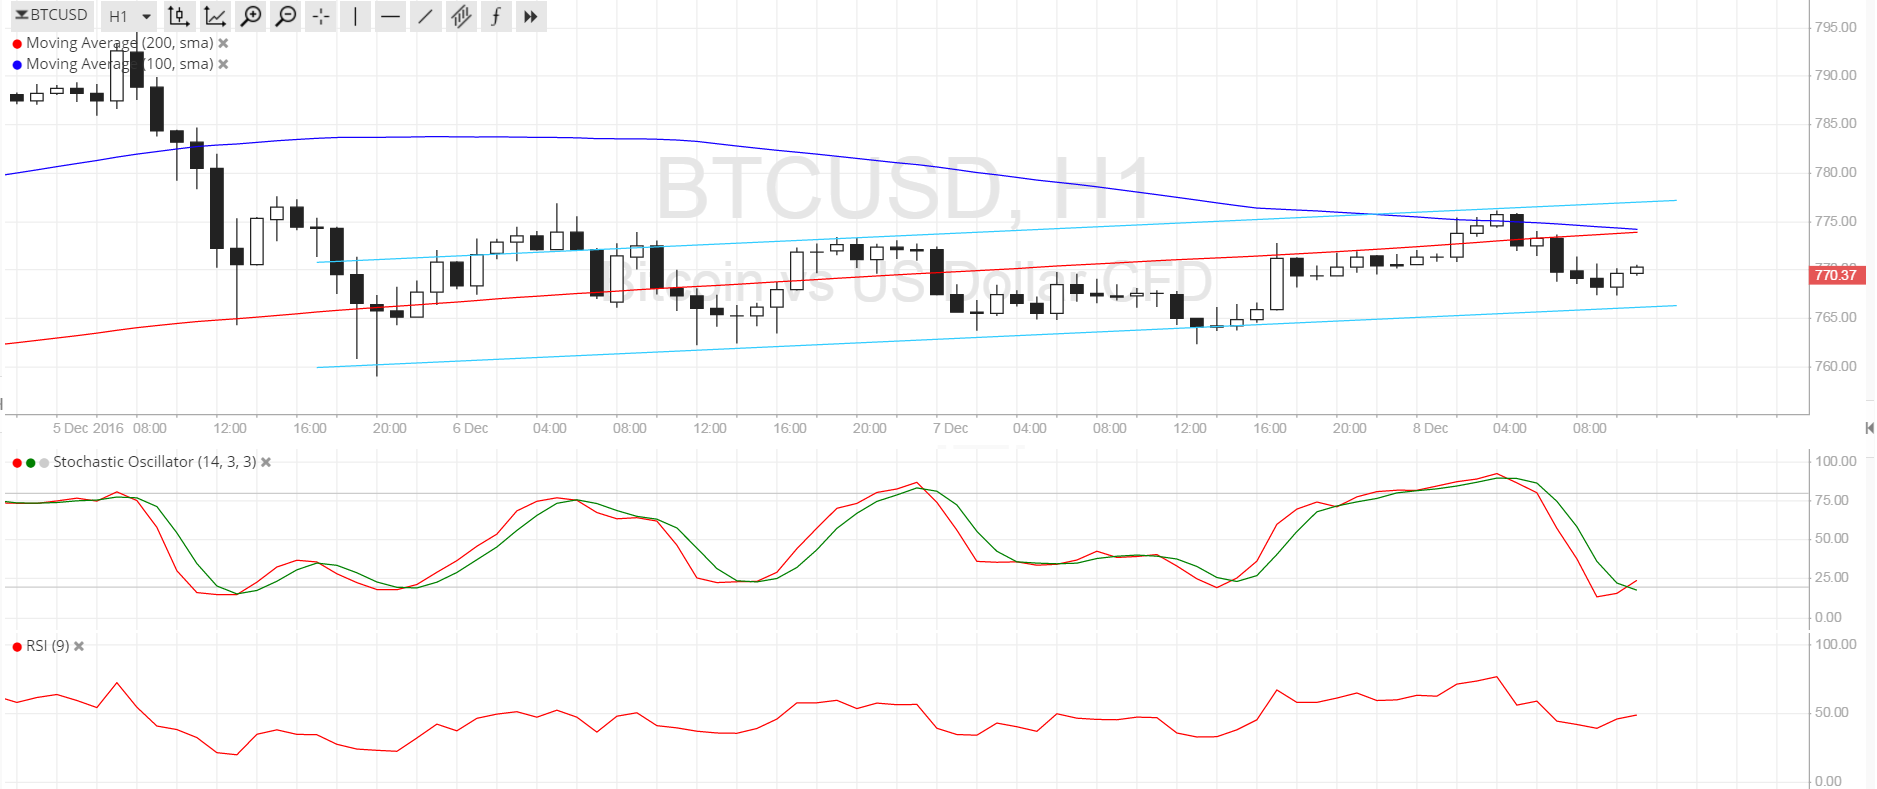 Bitcoin Price Technical Analysis for 12/08/2016 - Small Channel Sighted!